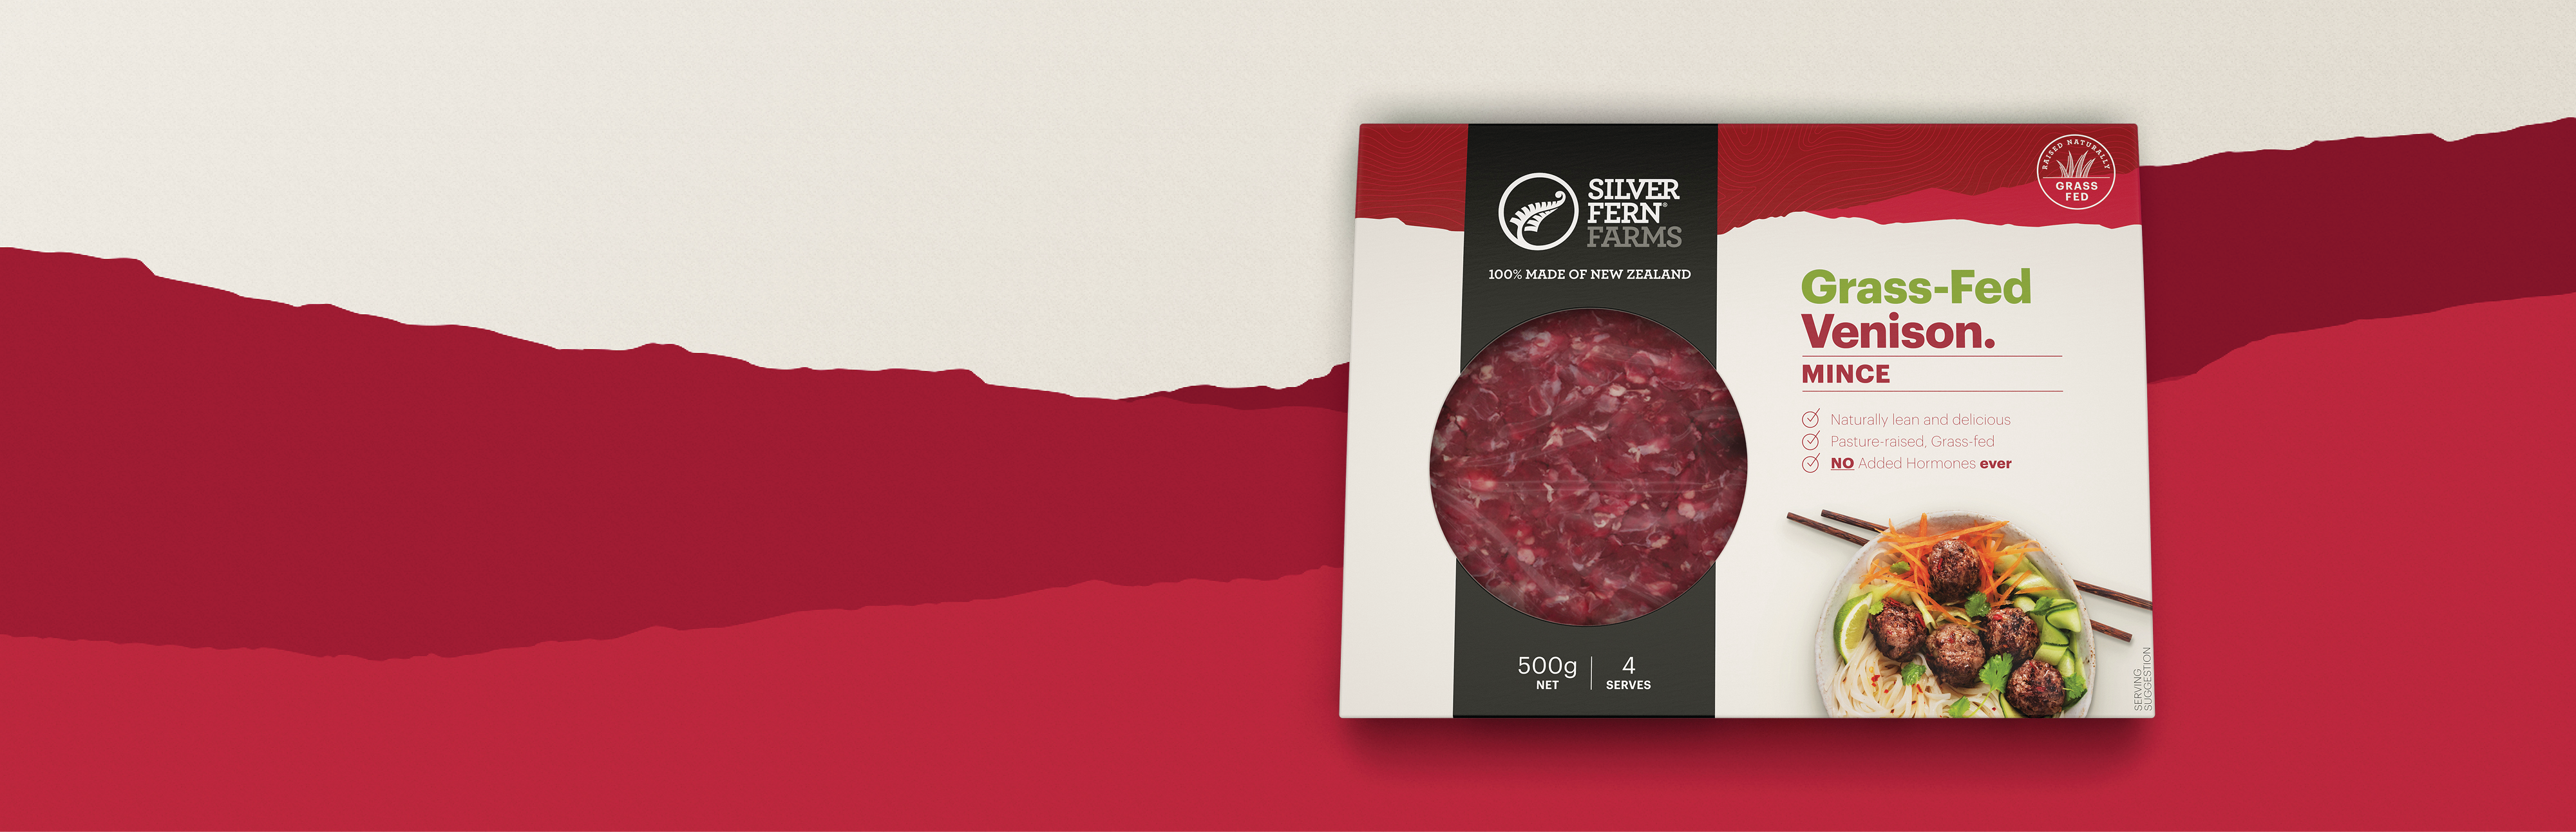 grass-fed venison mince packaging on an illustrated background of red hills